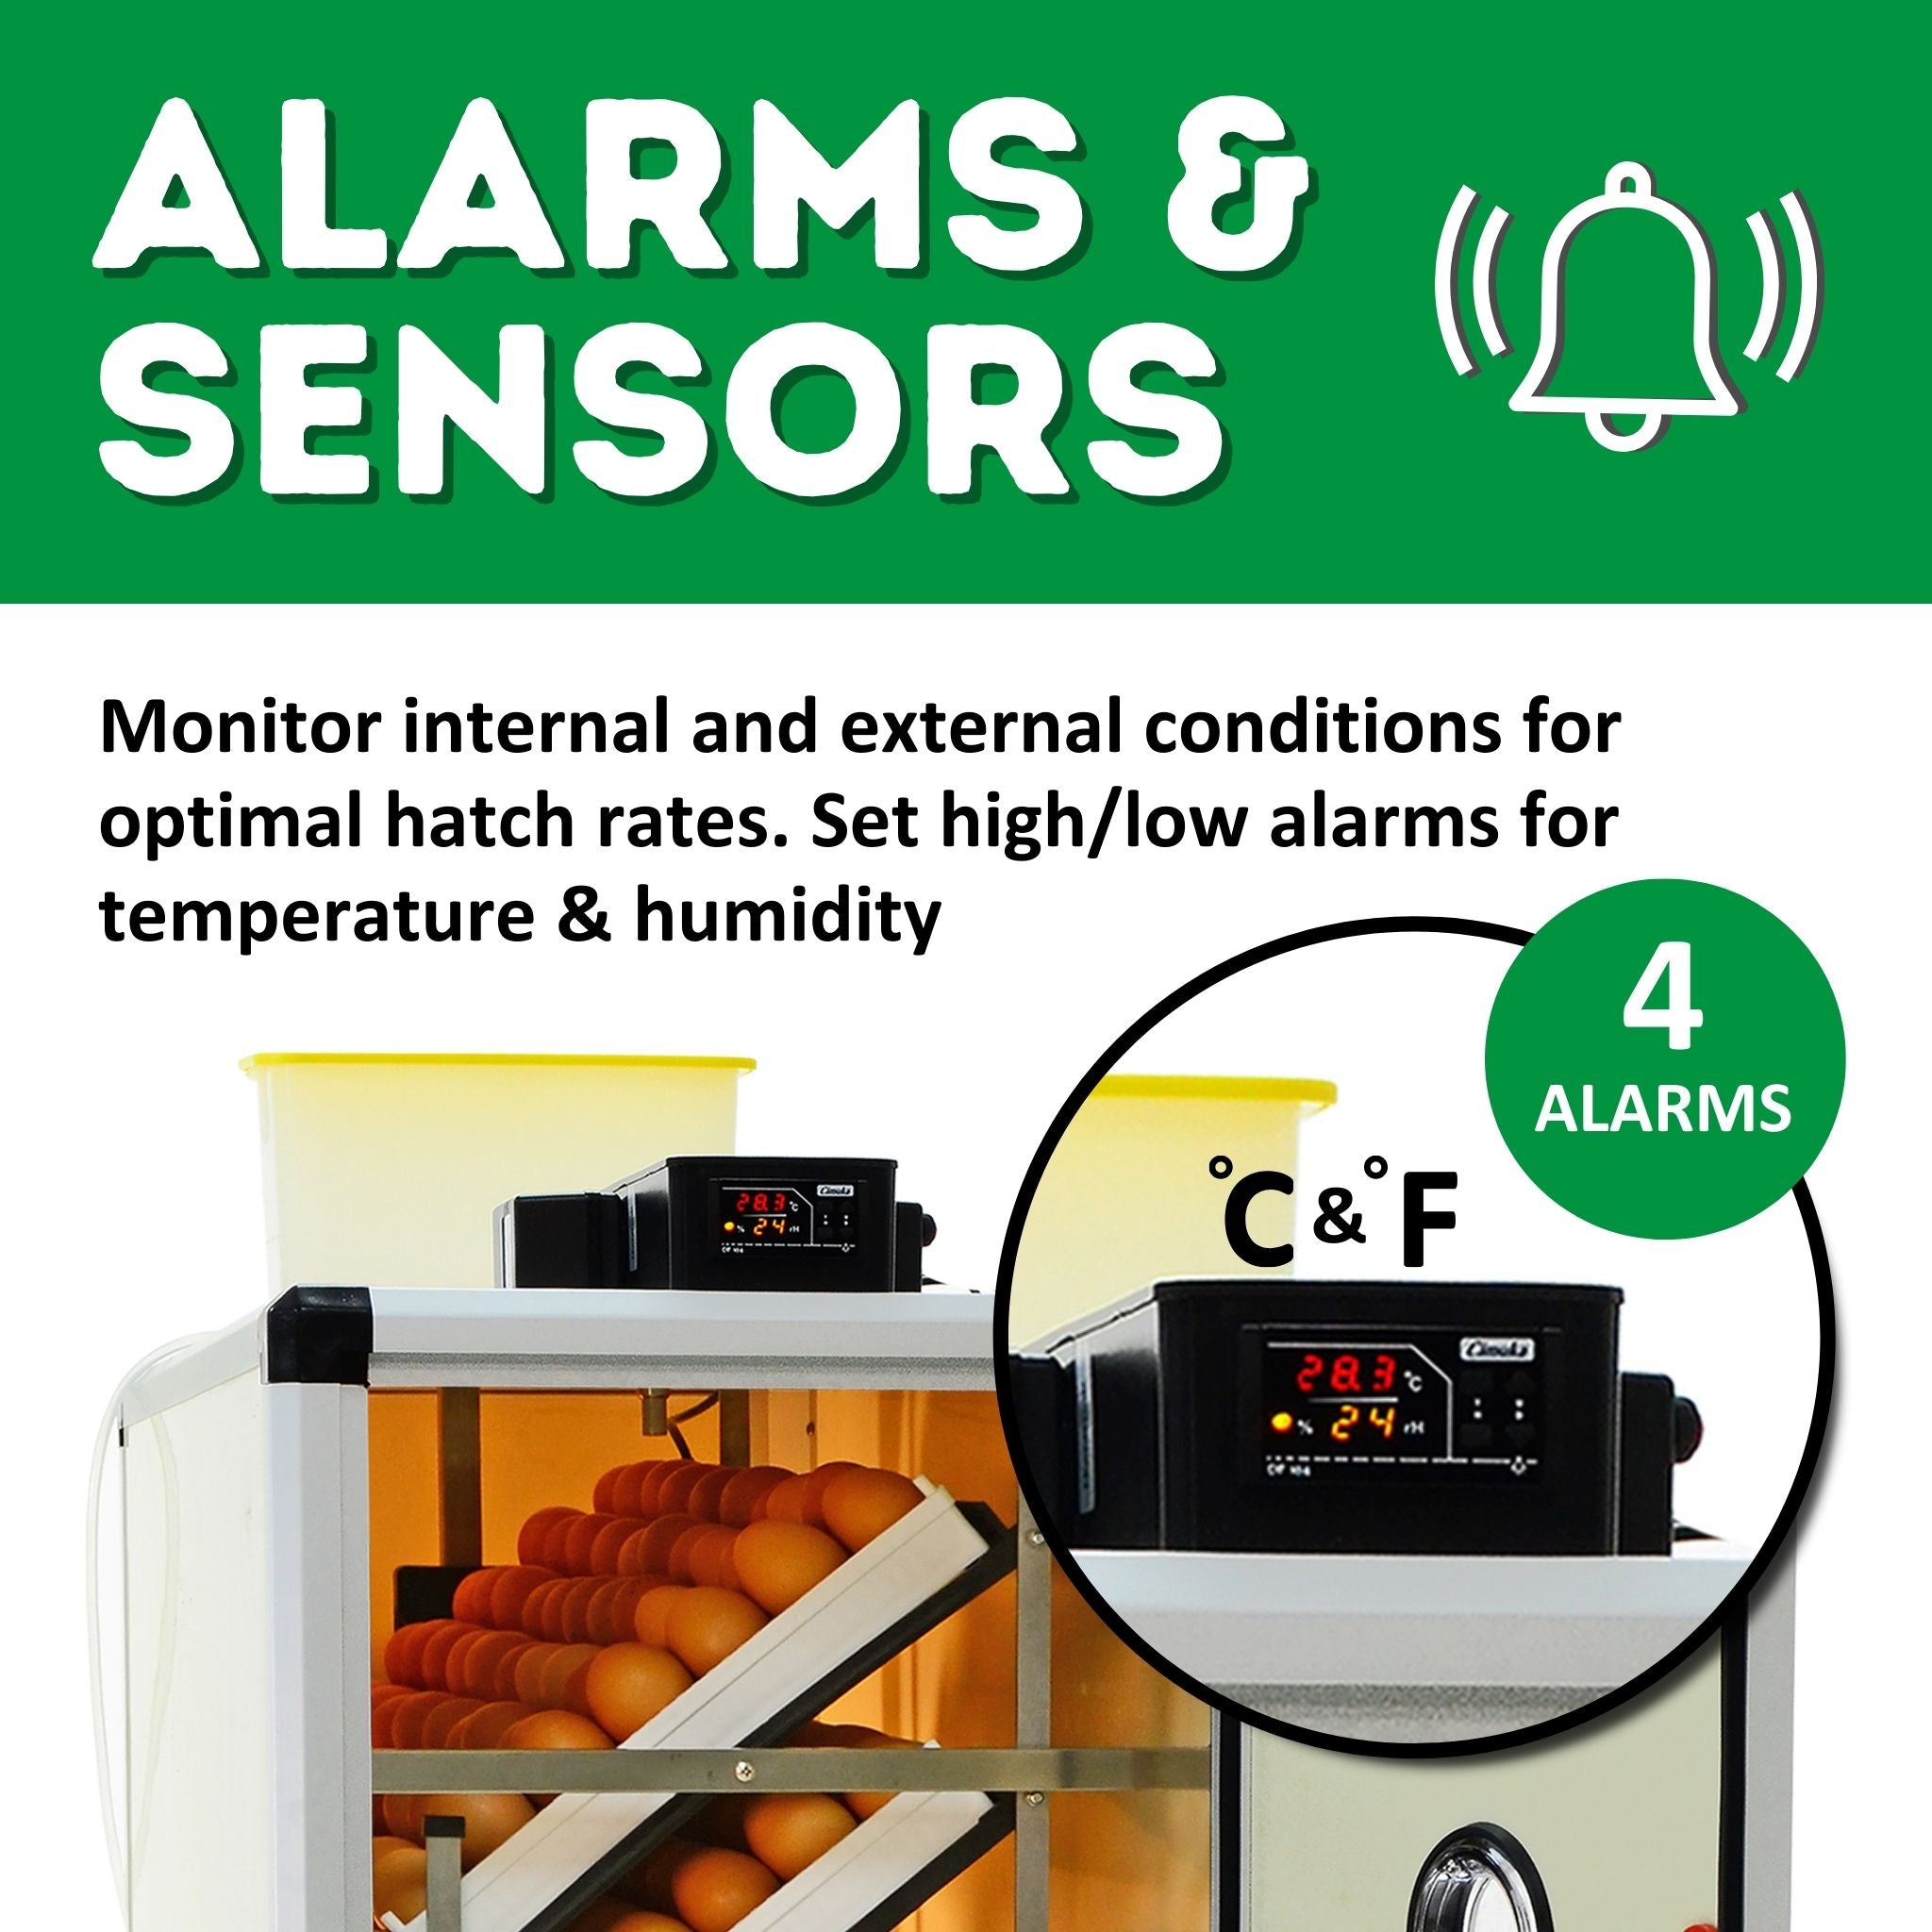 Hatching Time Cimuka. Image shows a focus on digital controls that have alarms and sensors for temperature and humidity.